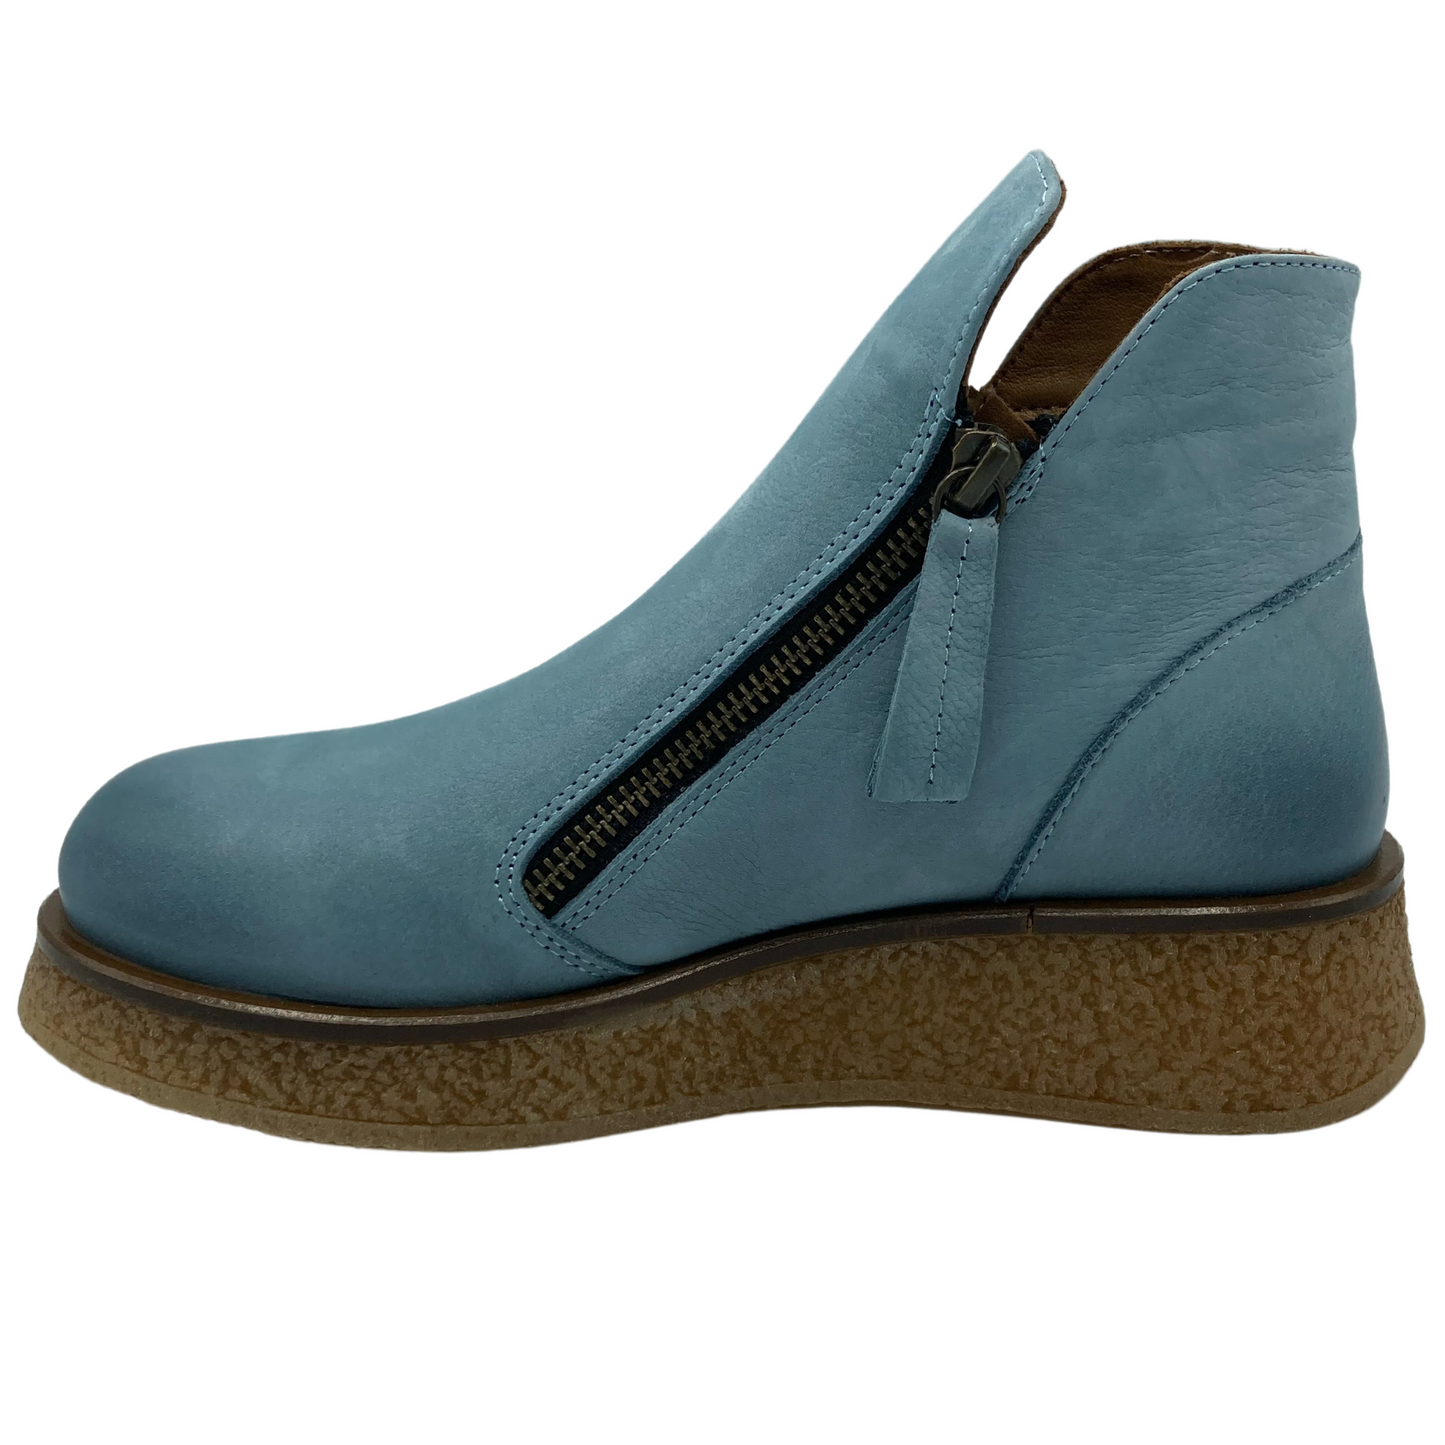 Left facing view of sky blue ankle boot with double zipper closure and platform outsole